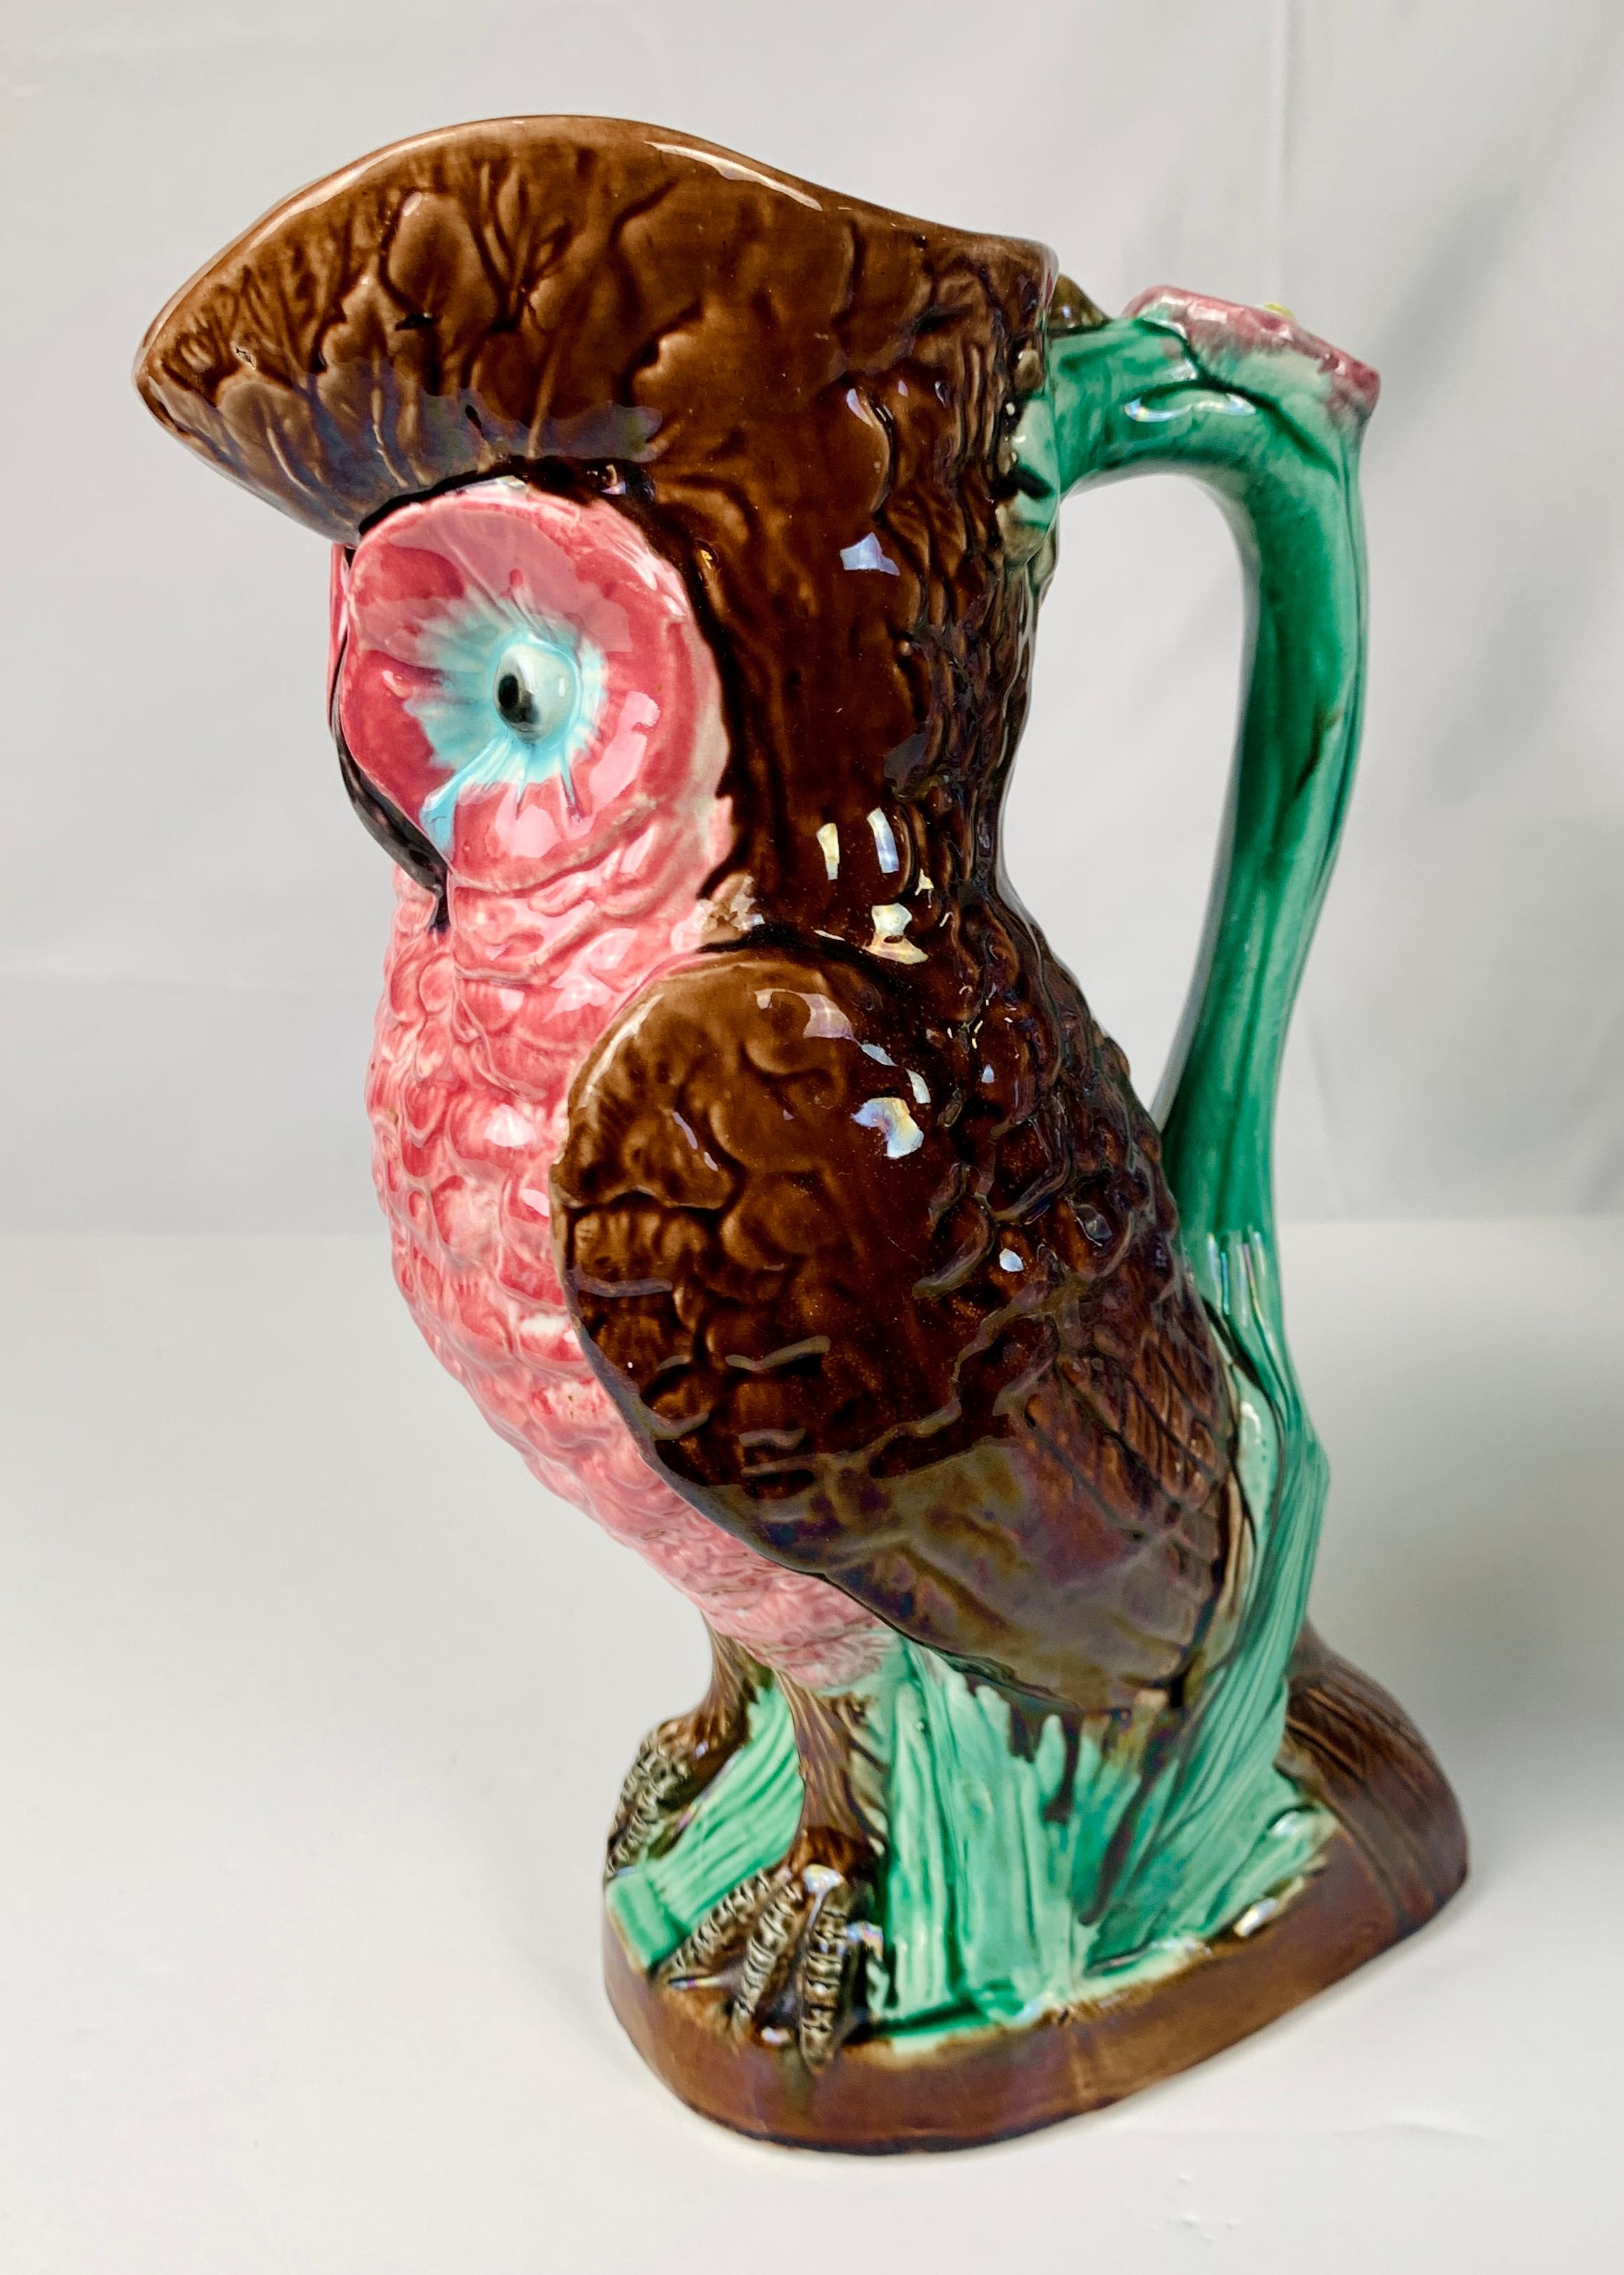 English Large Majolica Owl Pitcher Art Nouveau Style Made in England, Late 19th Century